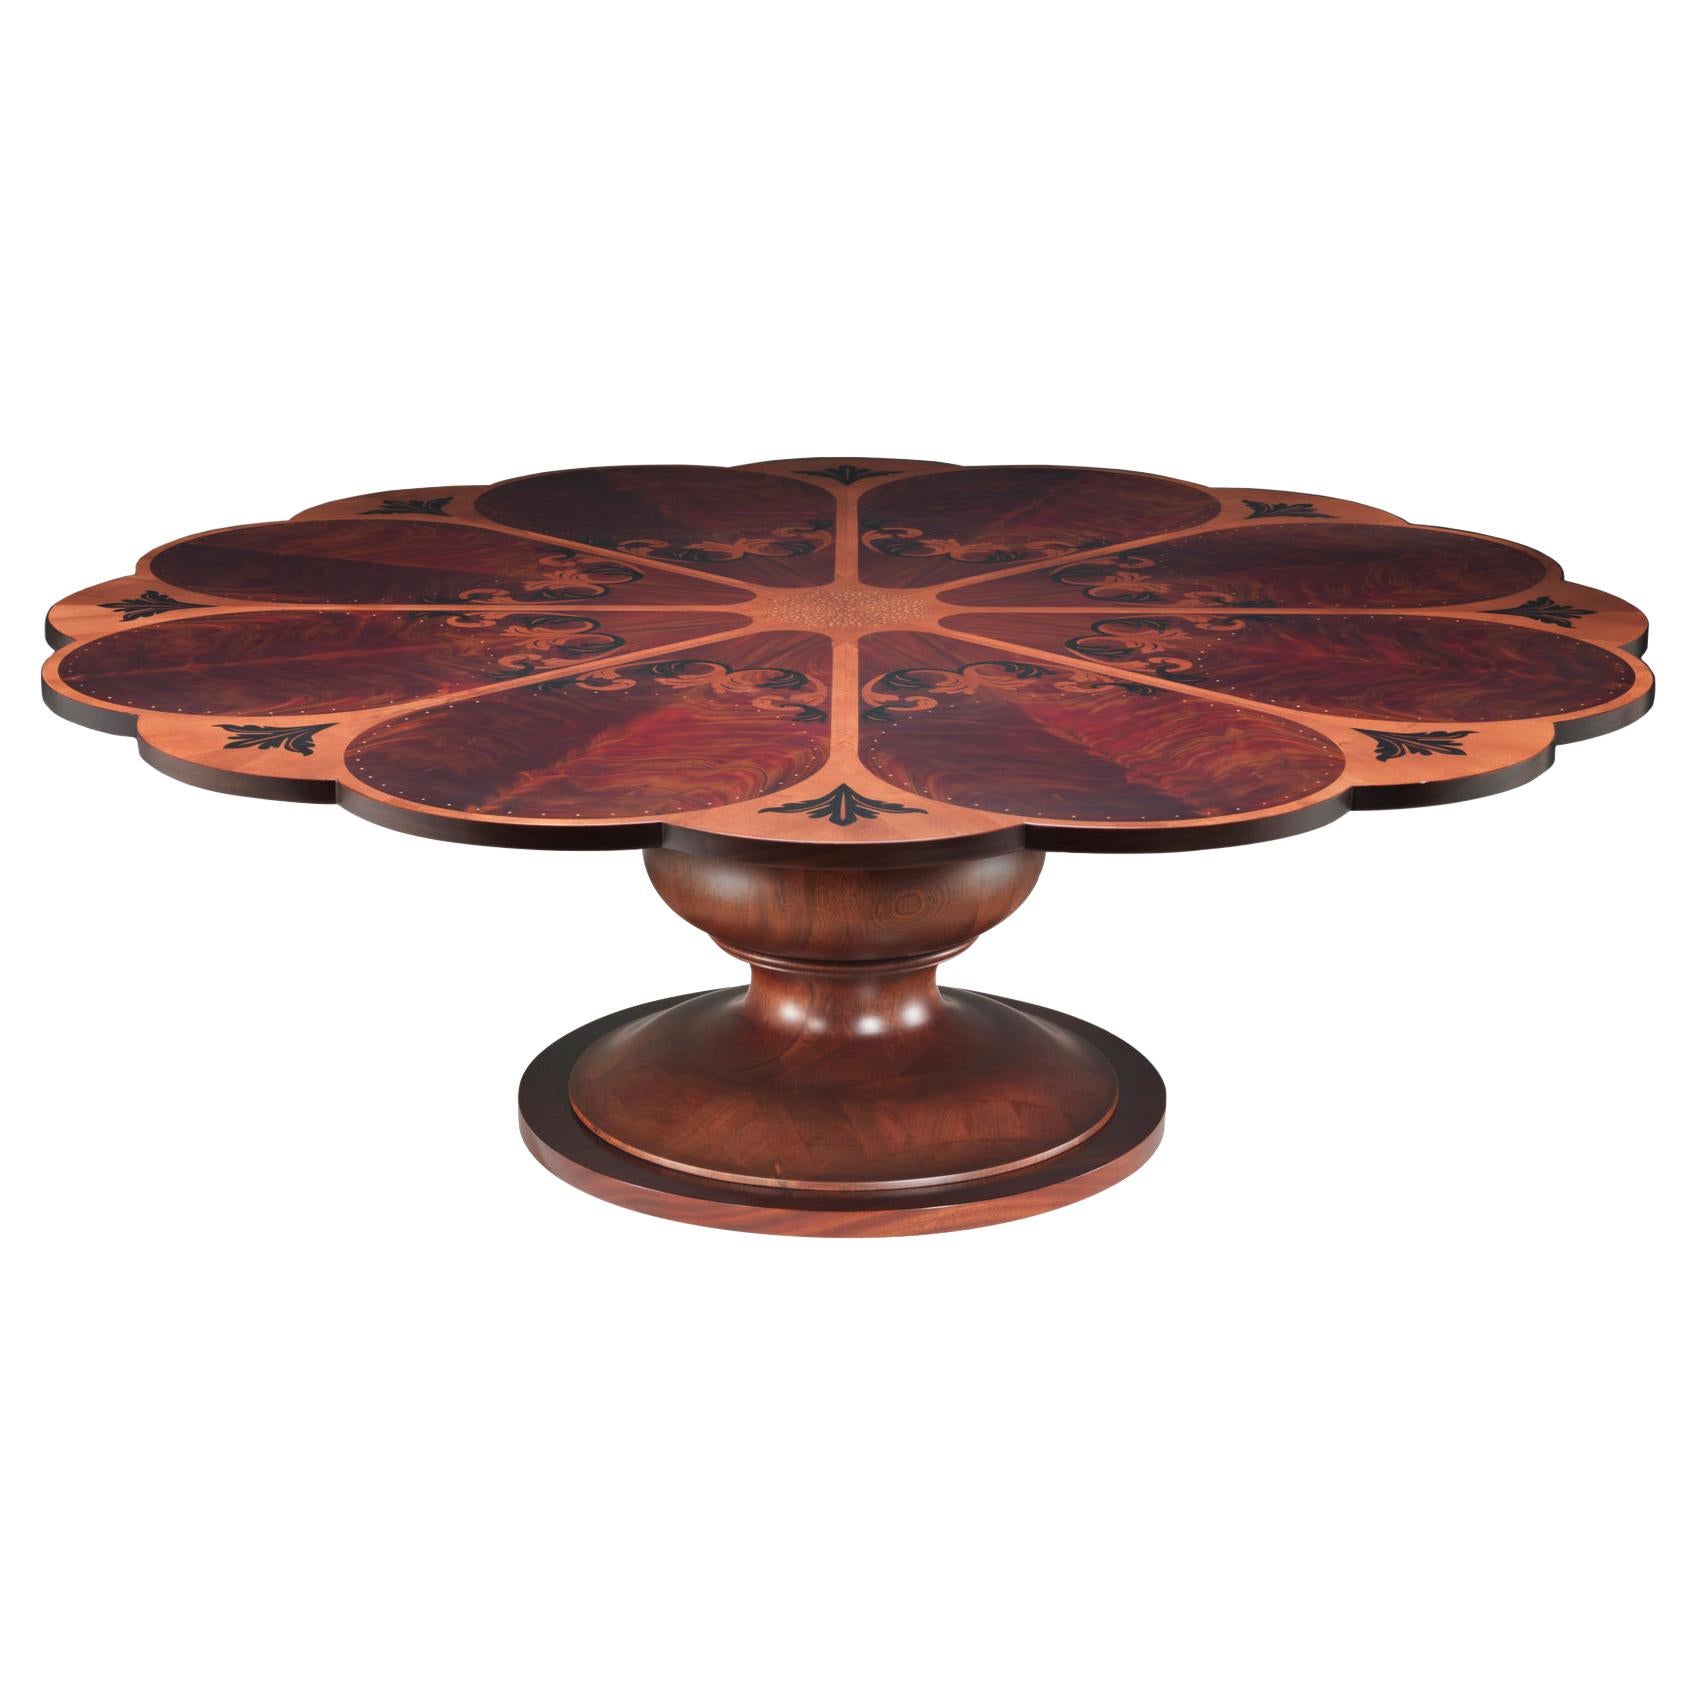 ENGLISH ROSE Round Inlayed Dining Table in Solid Mahogany Wood and Brass